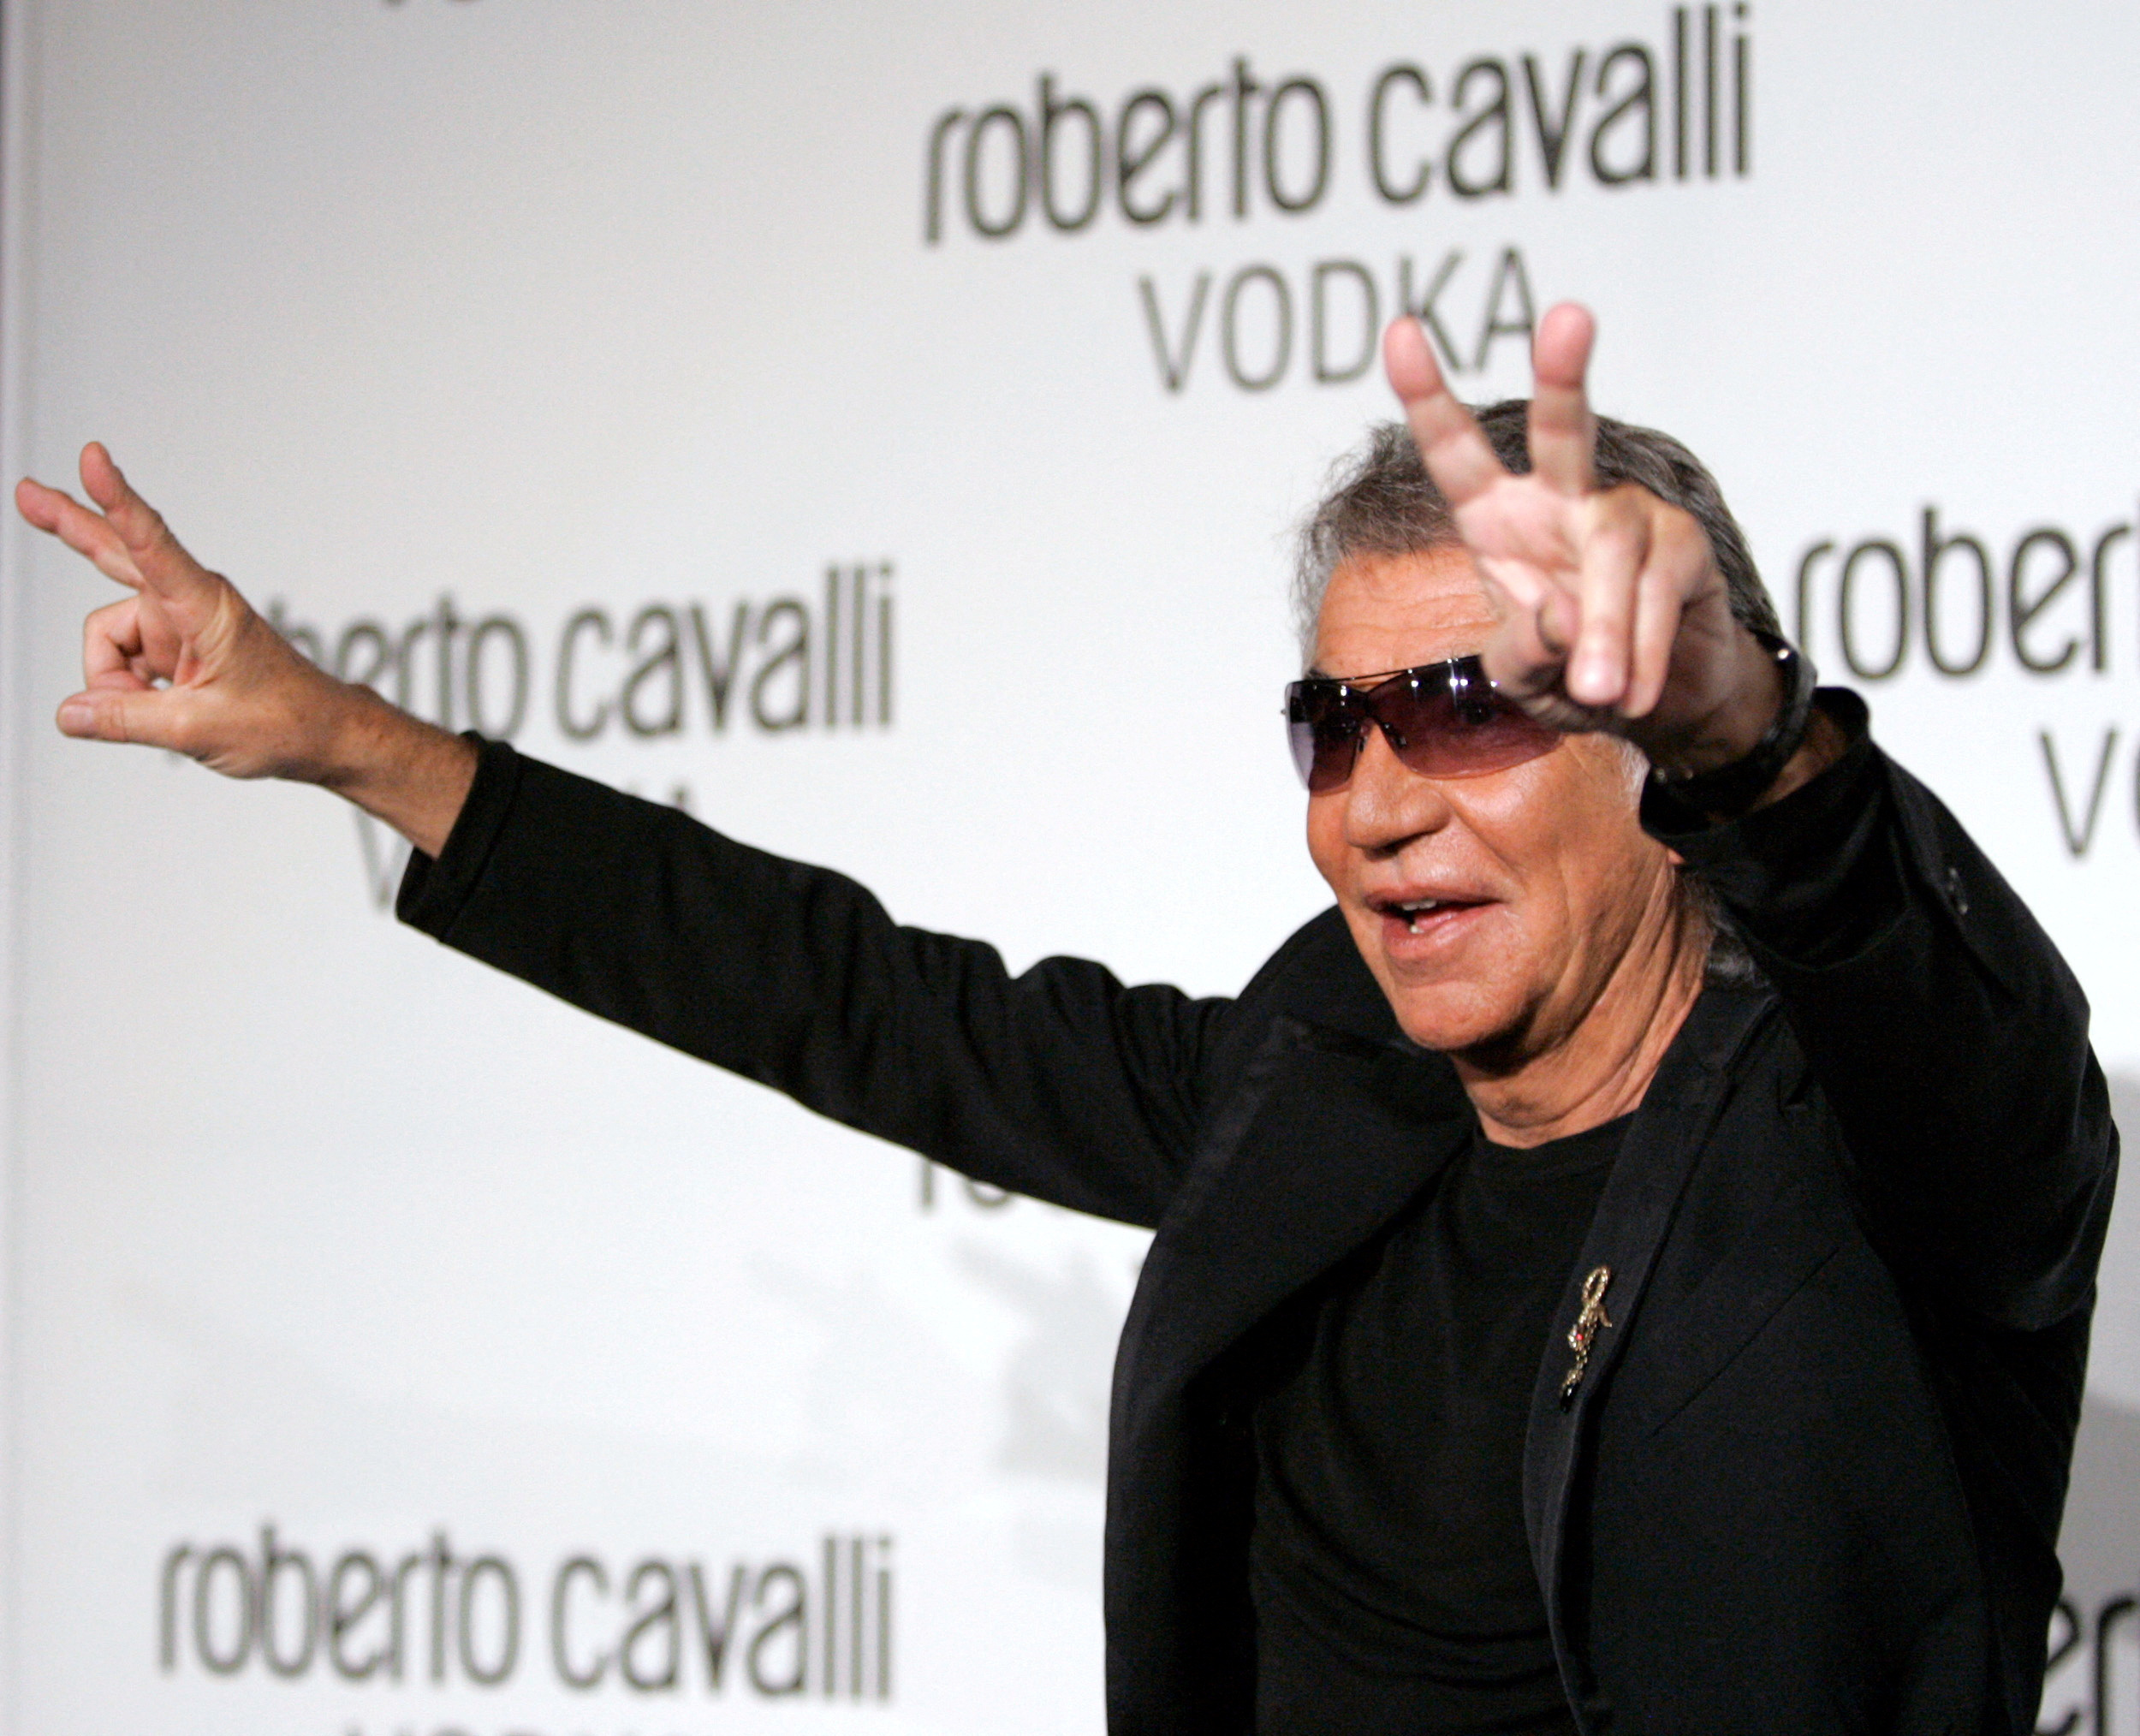 Roberto Cavalli gestures at launch party for Roberto Cavalli Vodka in Los Angeles